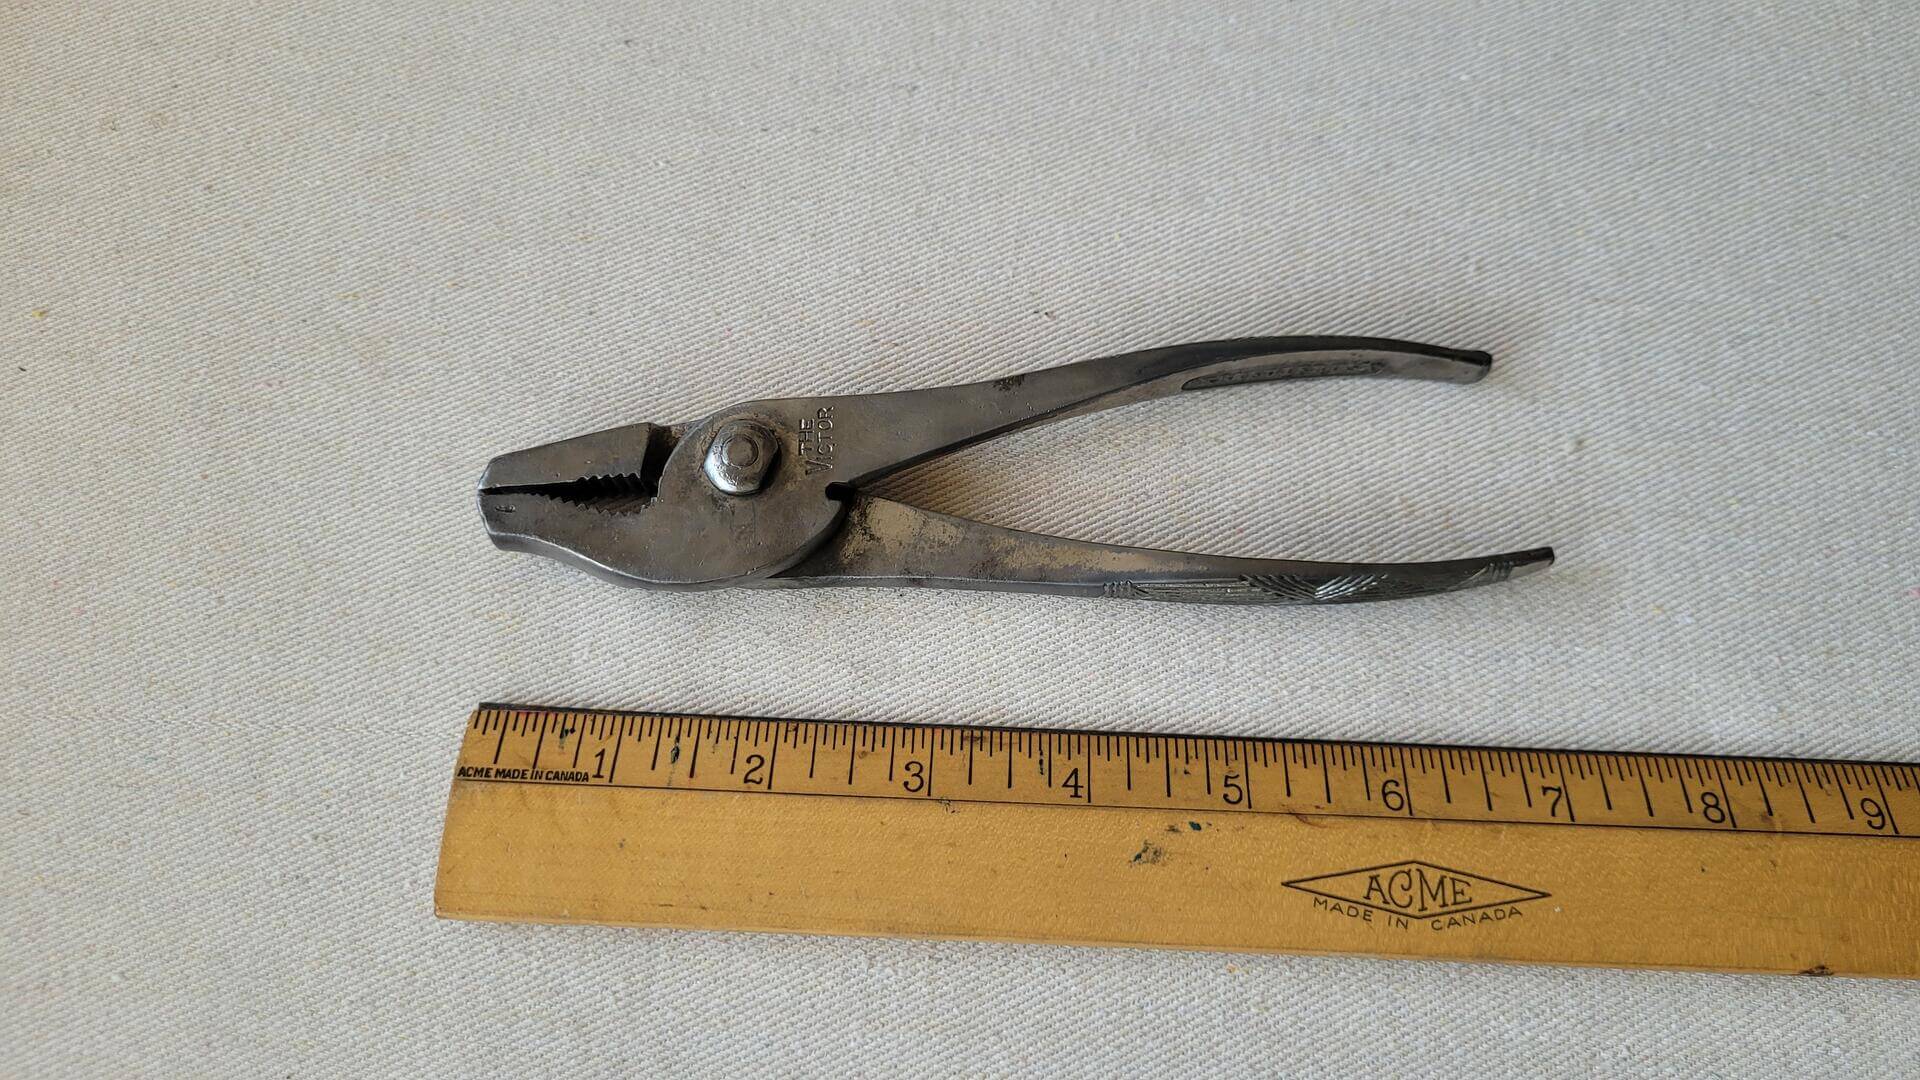 Antique Kraeuter & Company 305-7 "The Victor" universal slip-joint pliers. Vintage made in USA collectible early 20th century gripping hand tools